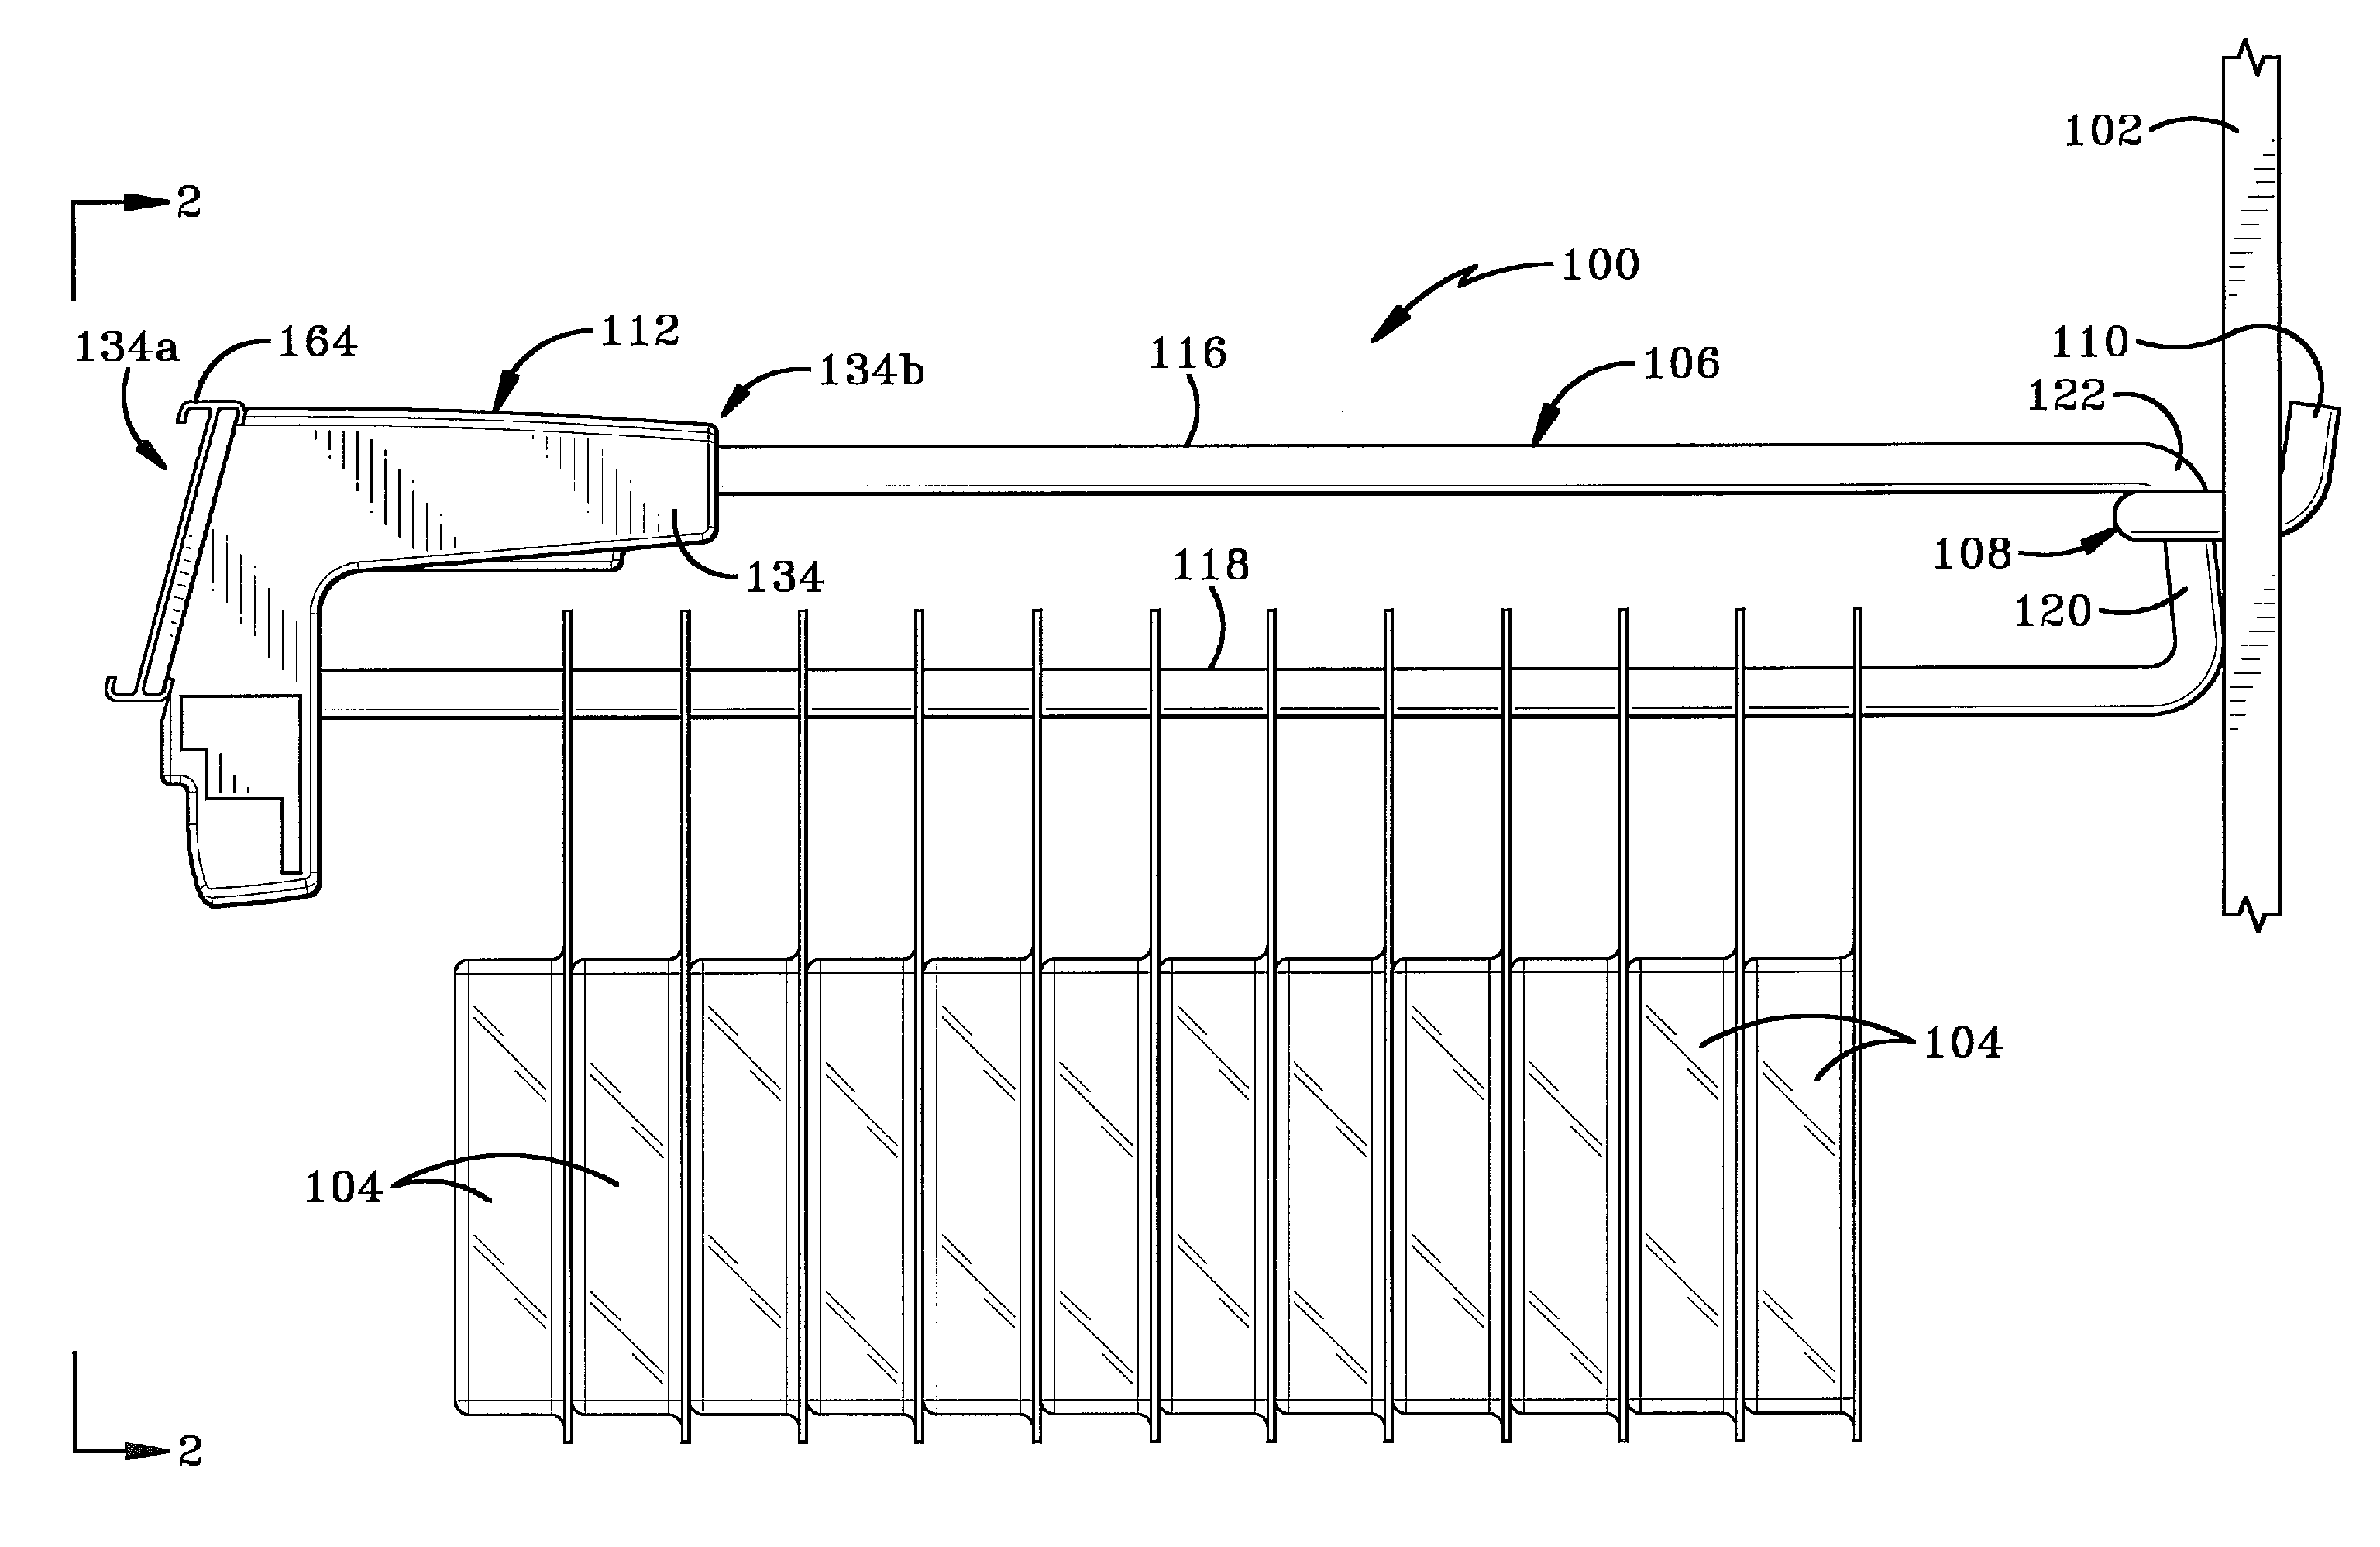 Display hook assembly having a secure free end